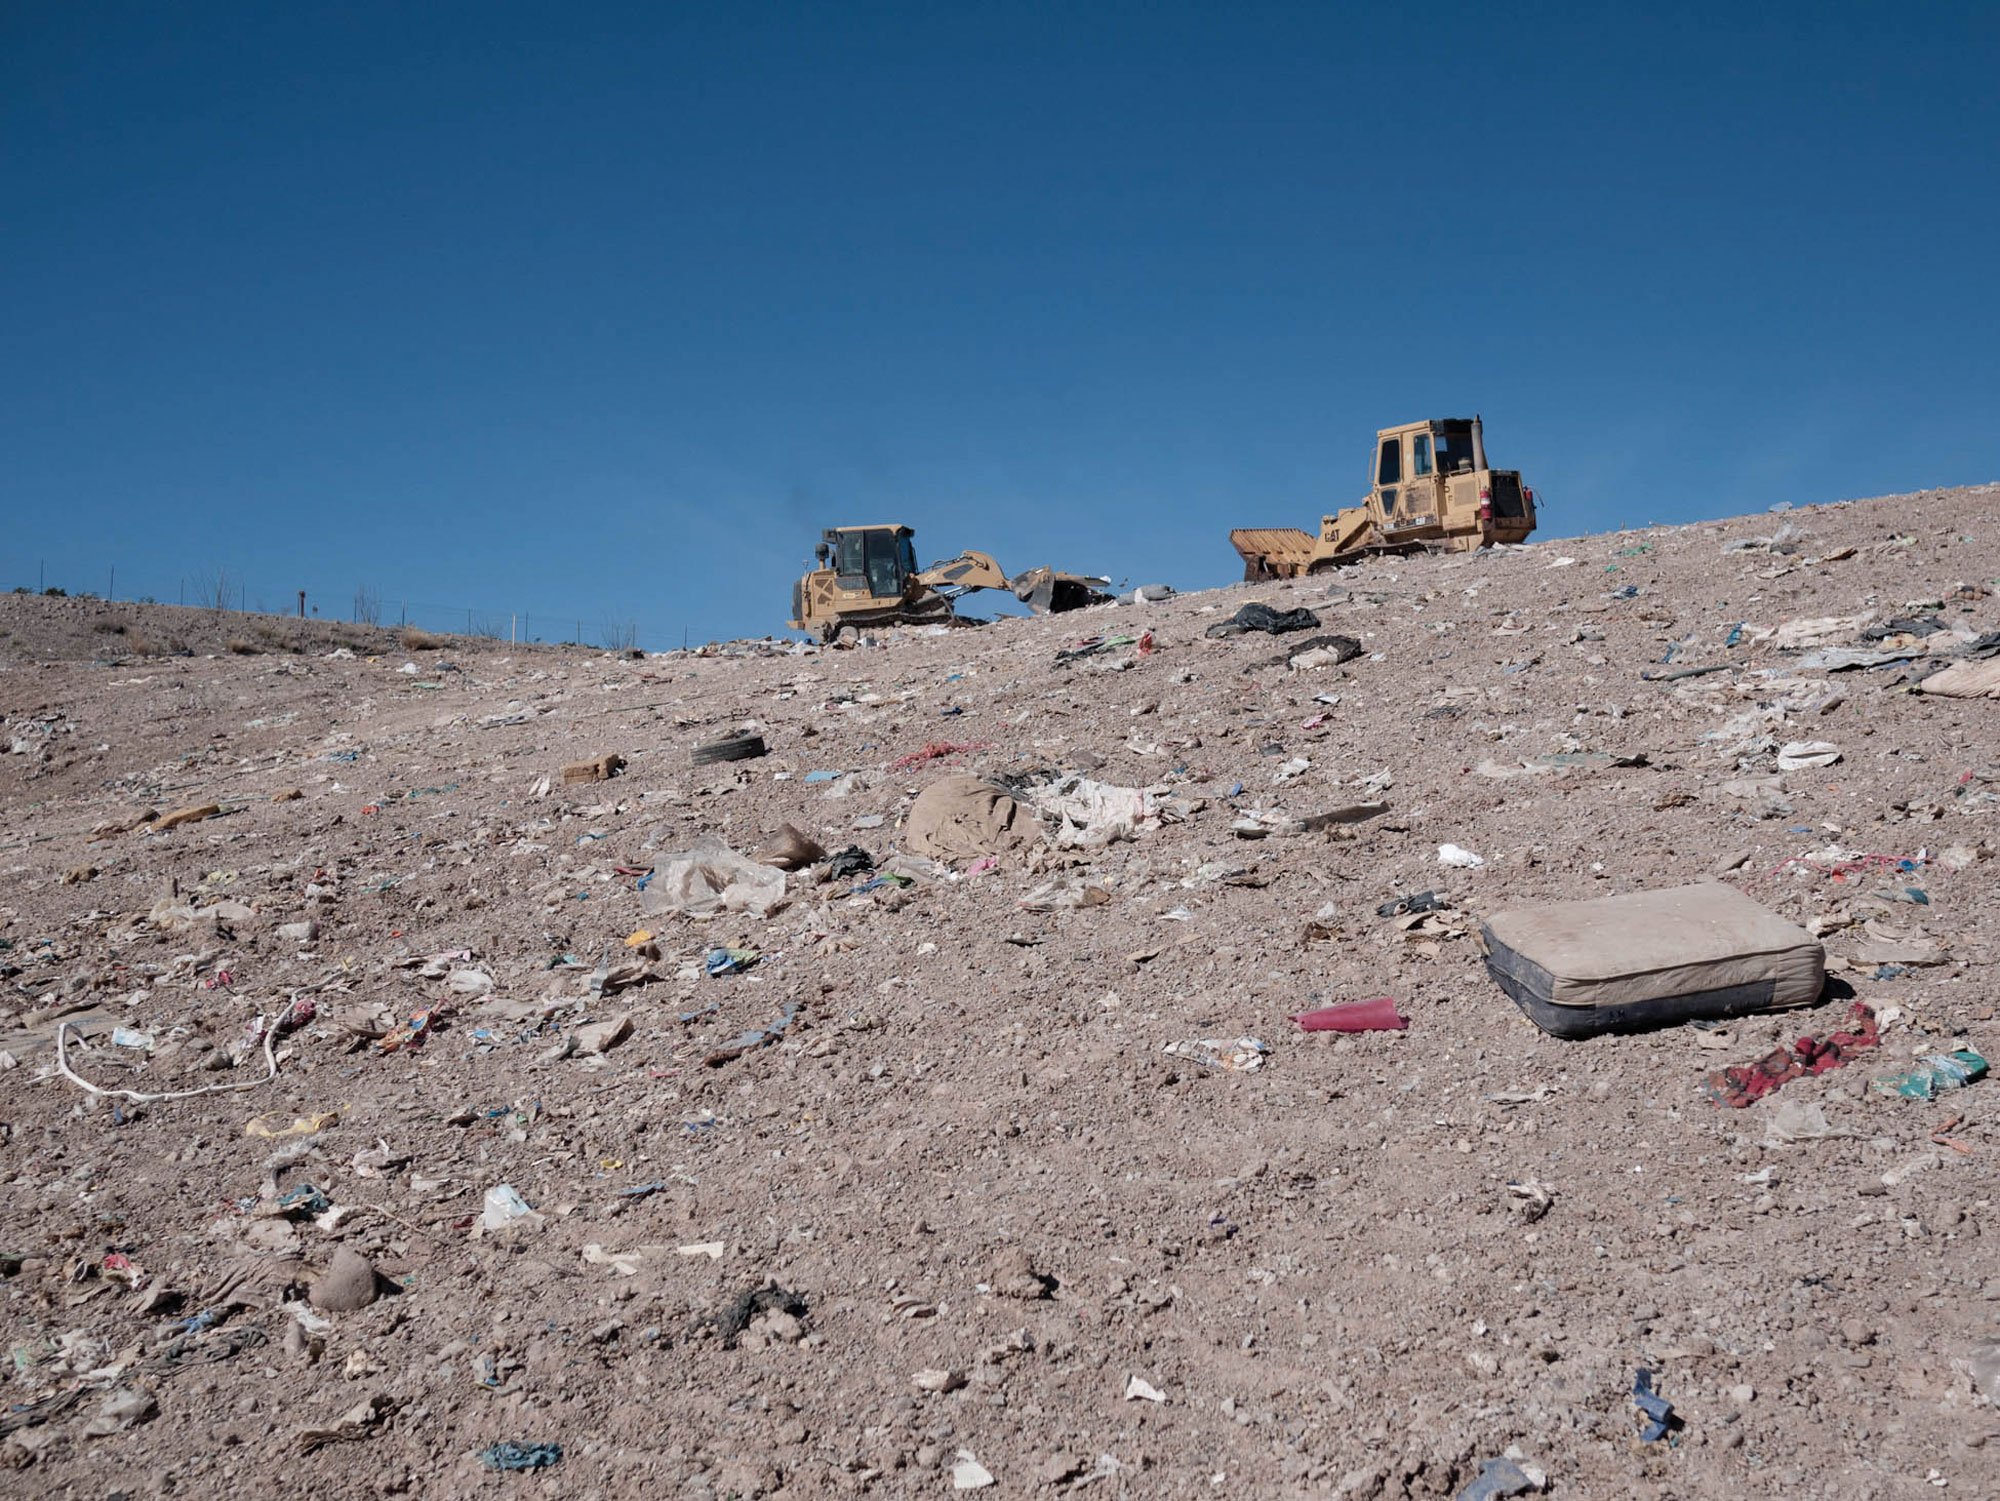 In November 2015, an unprecedented 76 dead horses and burros were disposed of at Presidio's landfill.